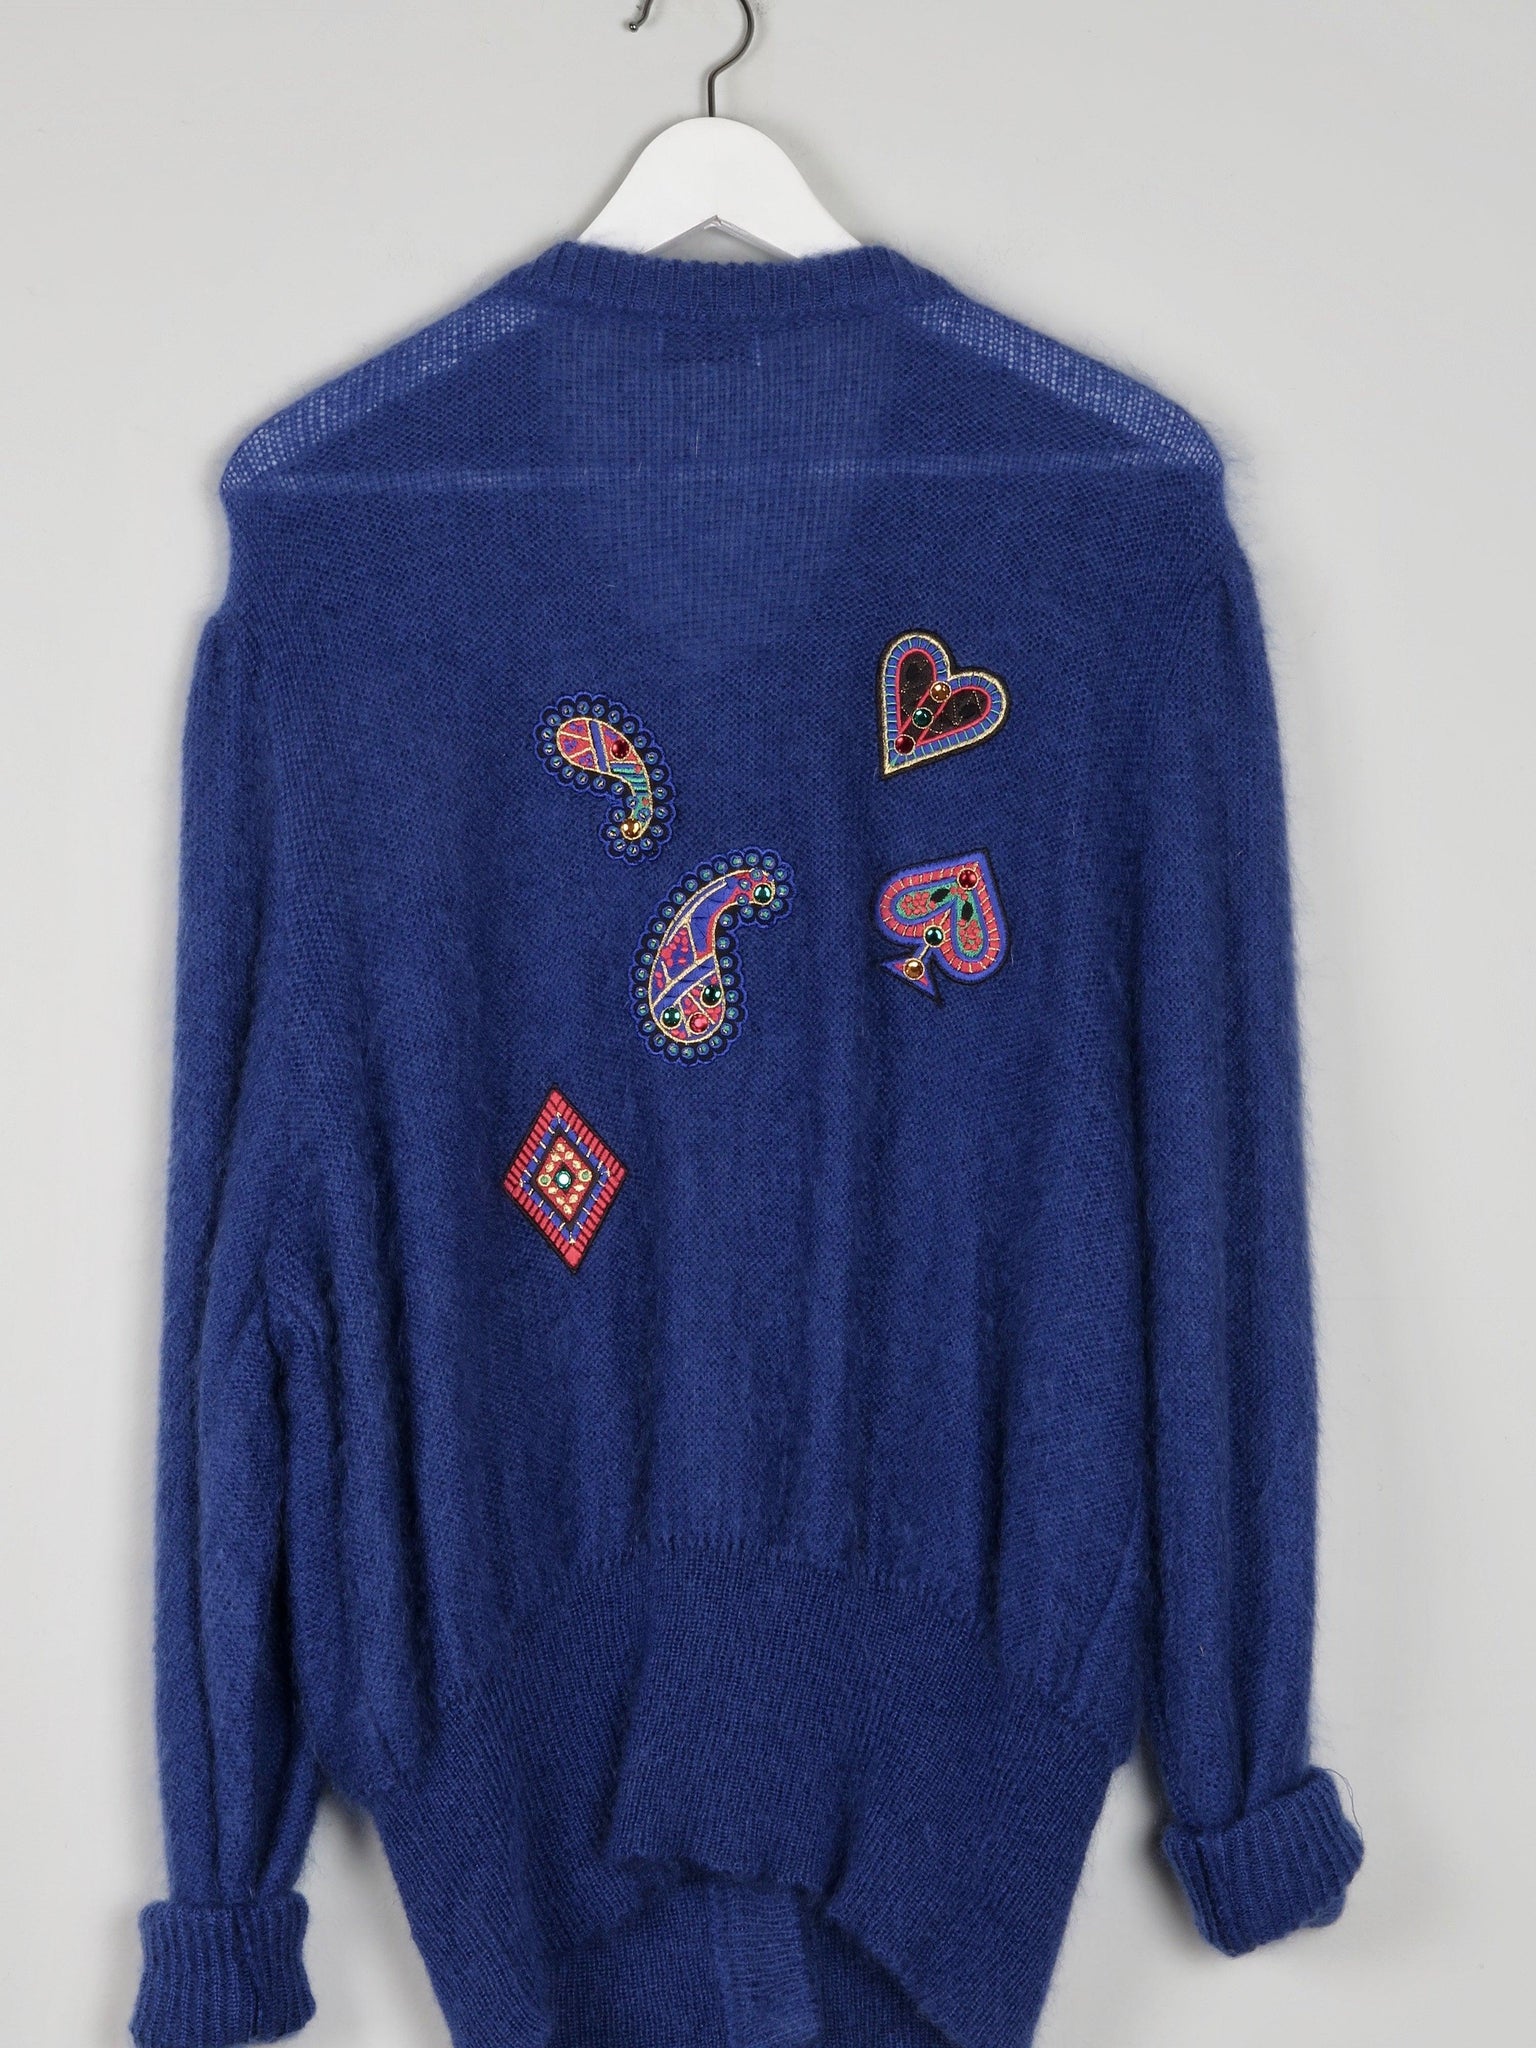 Women's Vintage Blue Mohair Cardigan With Motifs M/L - The Harlequin